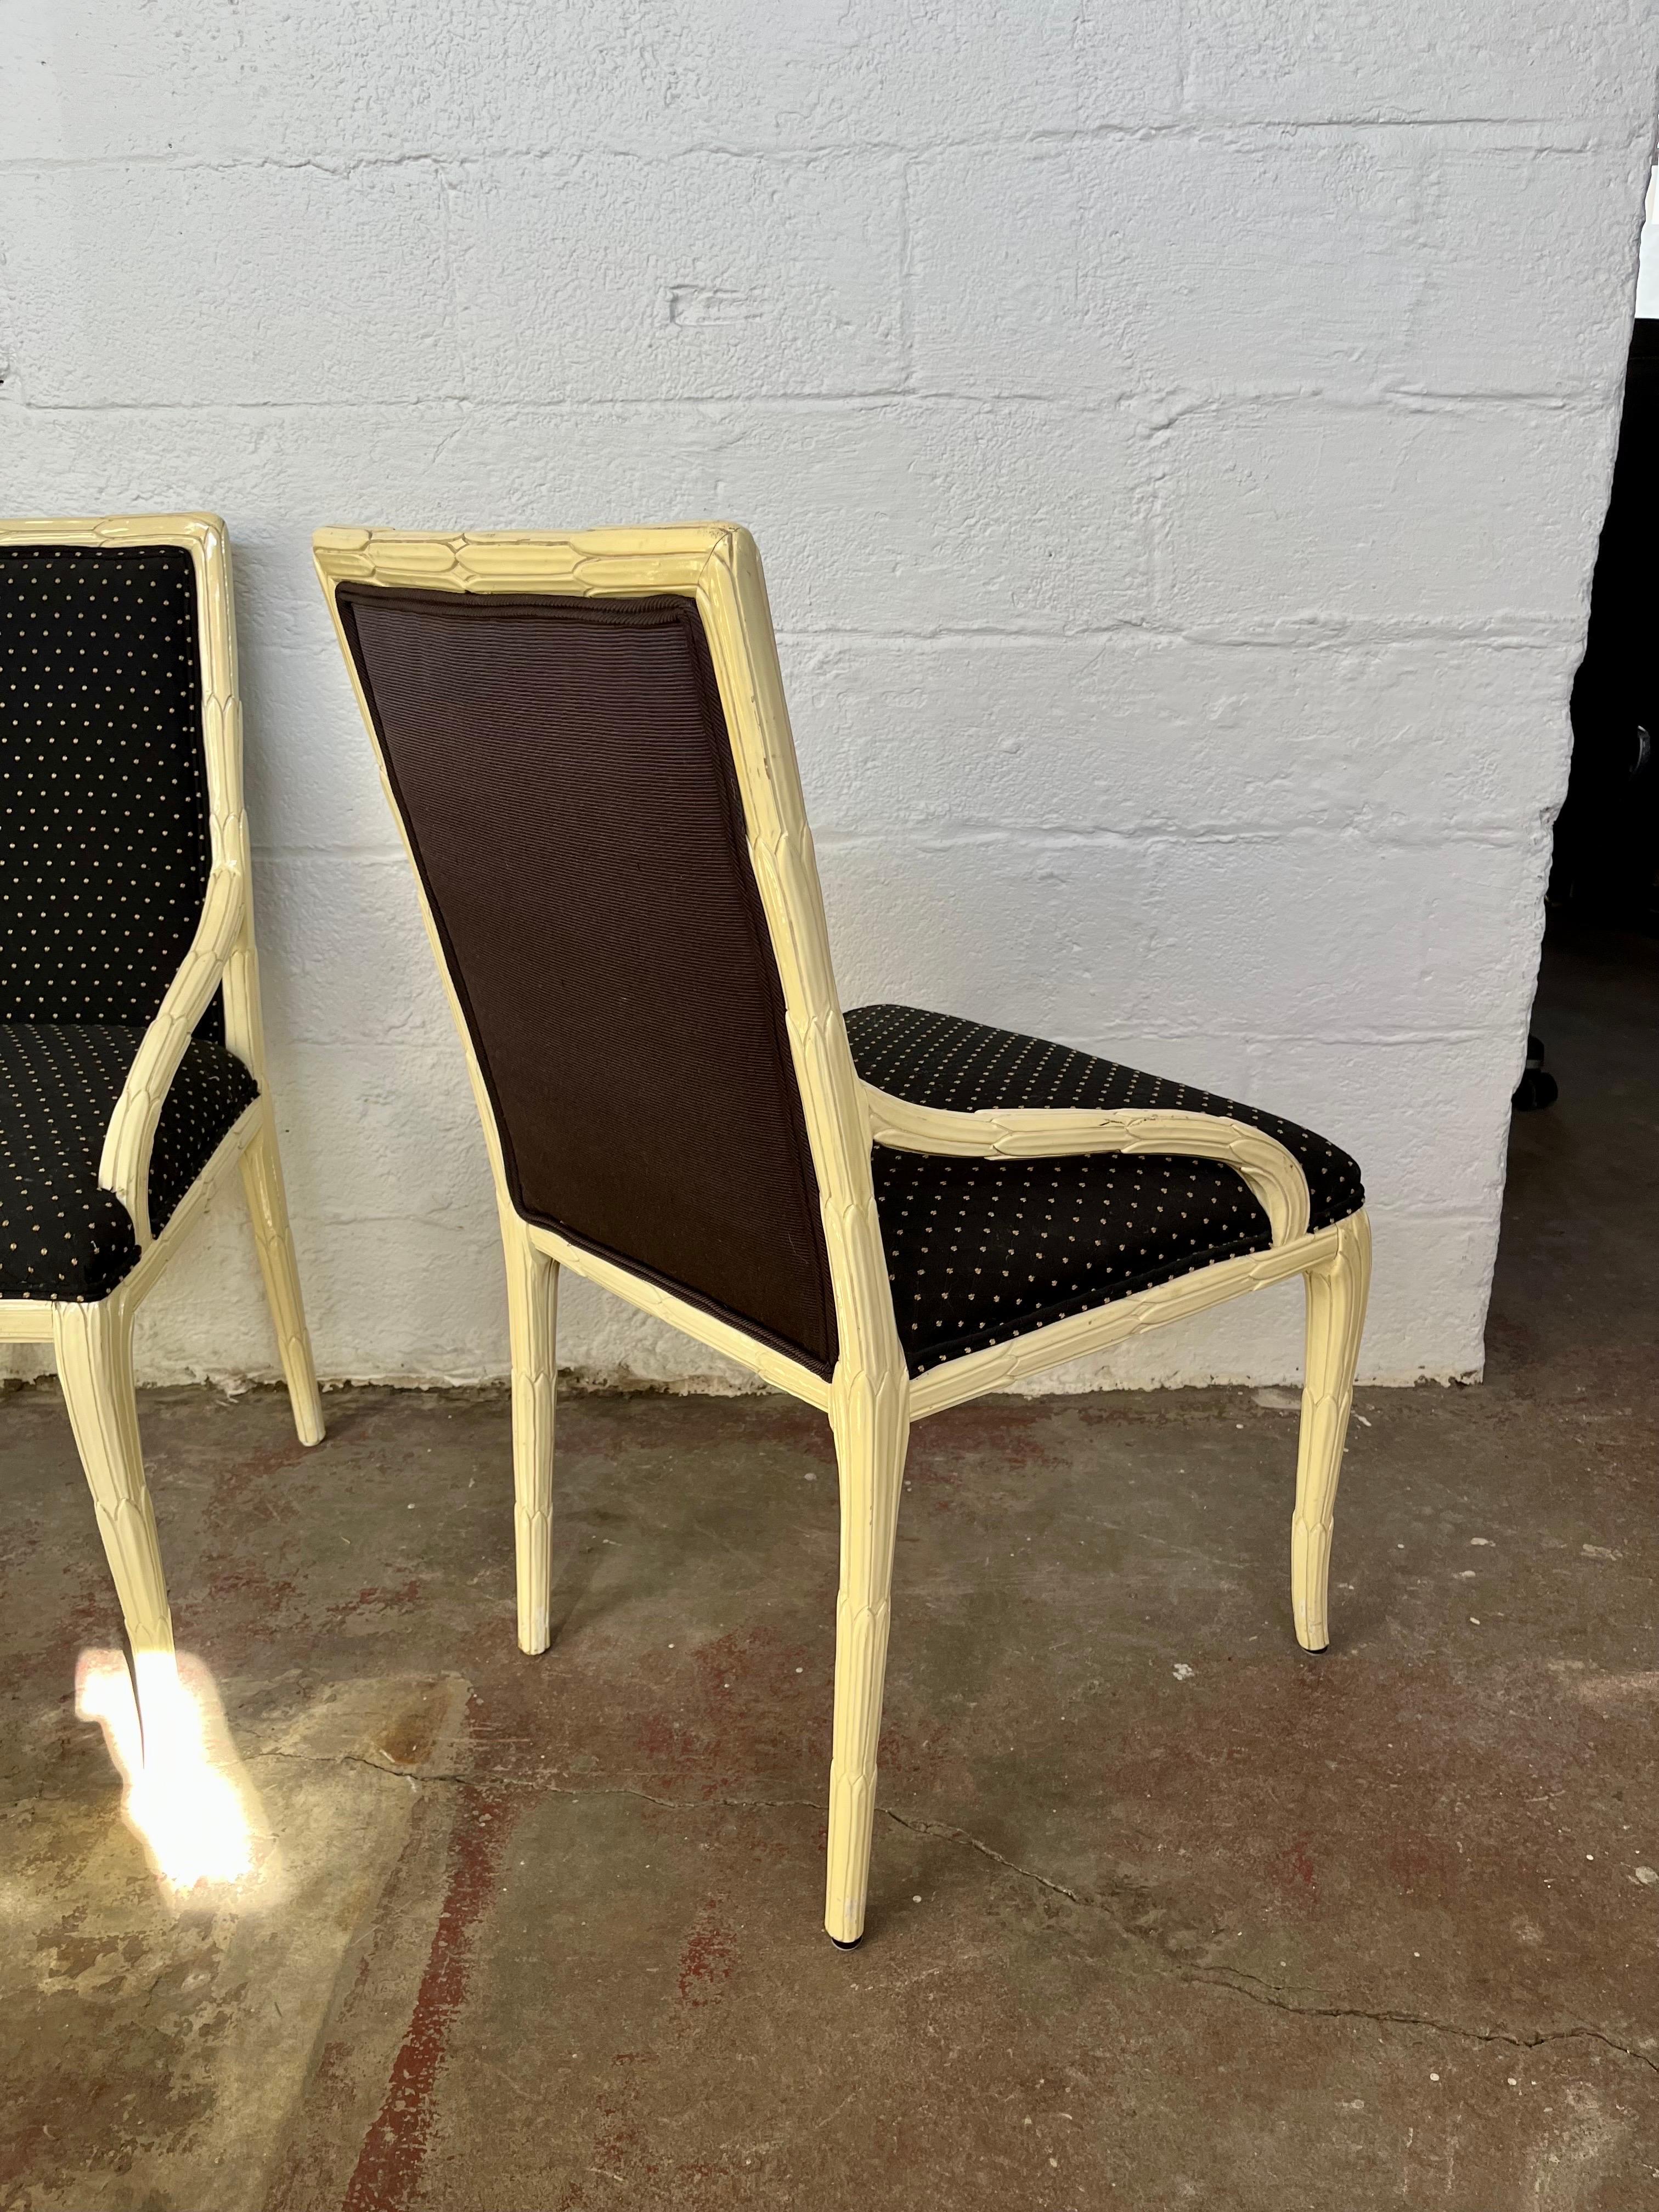 Upholstery Vintage Hollywood Regency Lacquer Palm Frond Dining Chairs For Sale